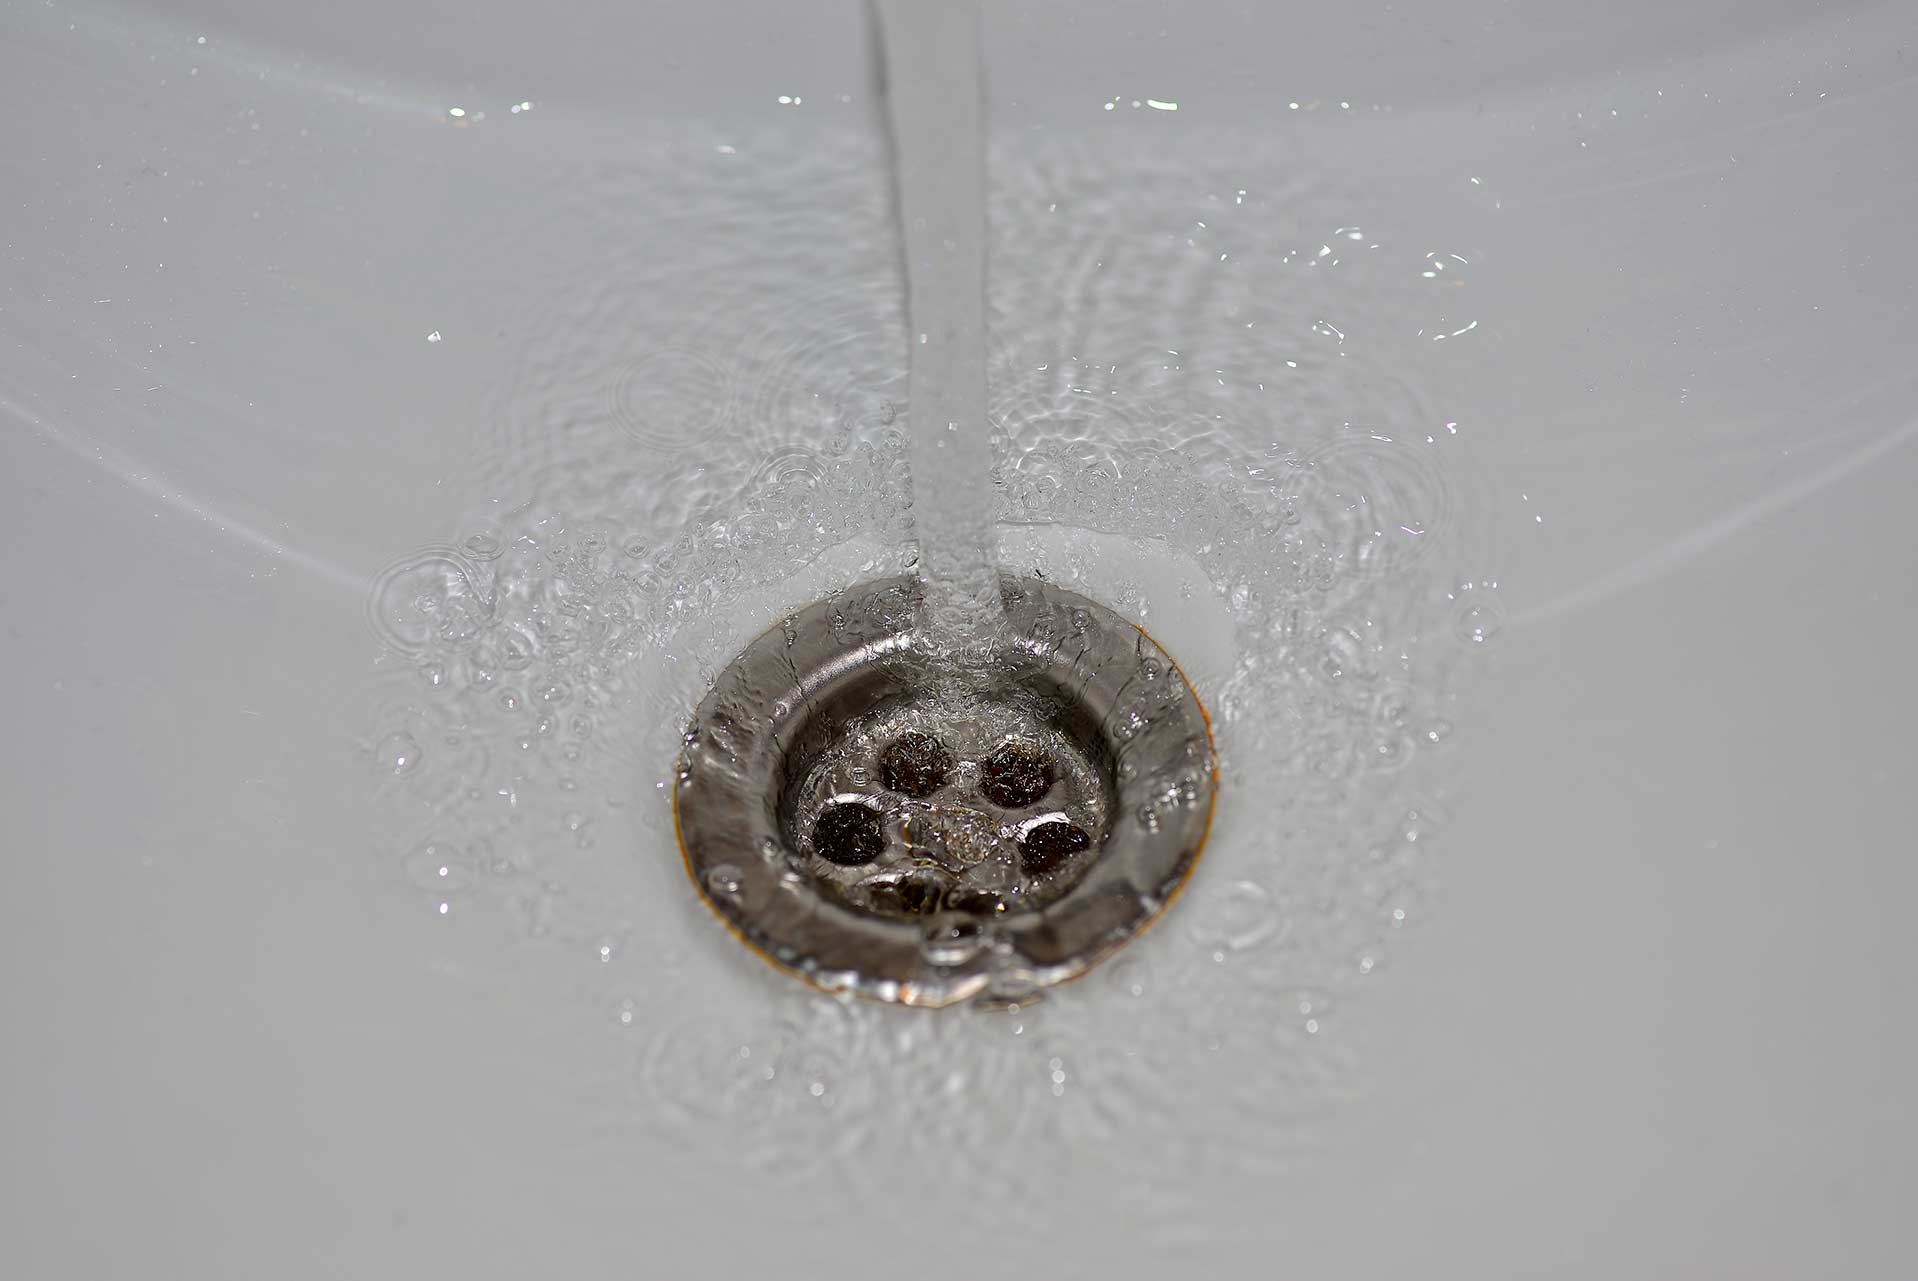 A2B Drains provides services to unblock blocked sinks and drains for properties in Stalybridge.